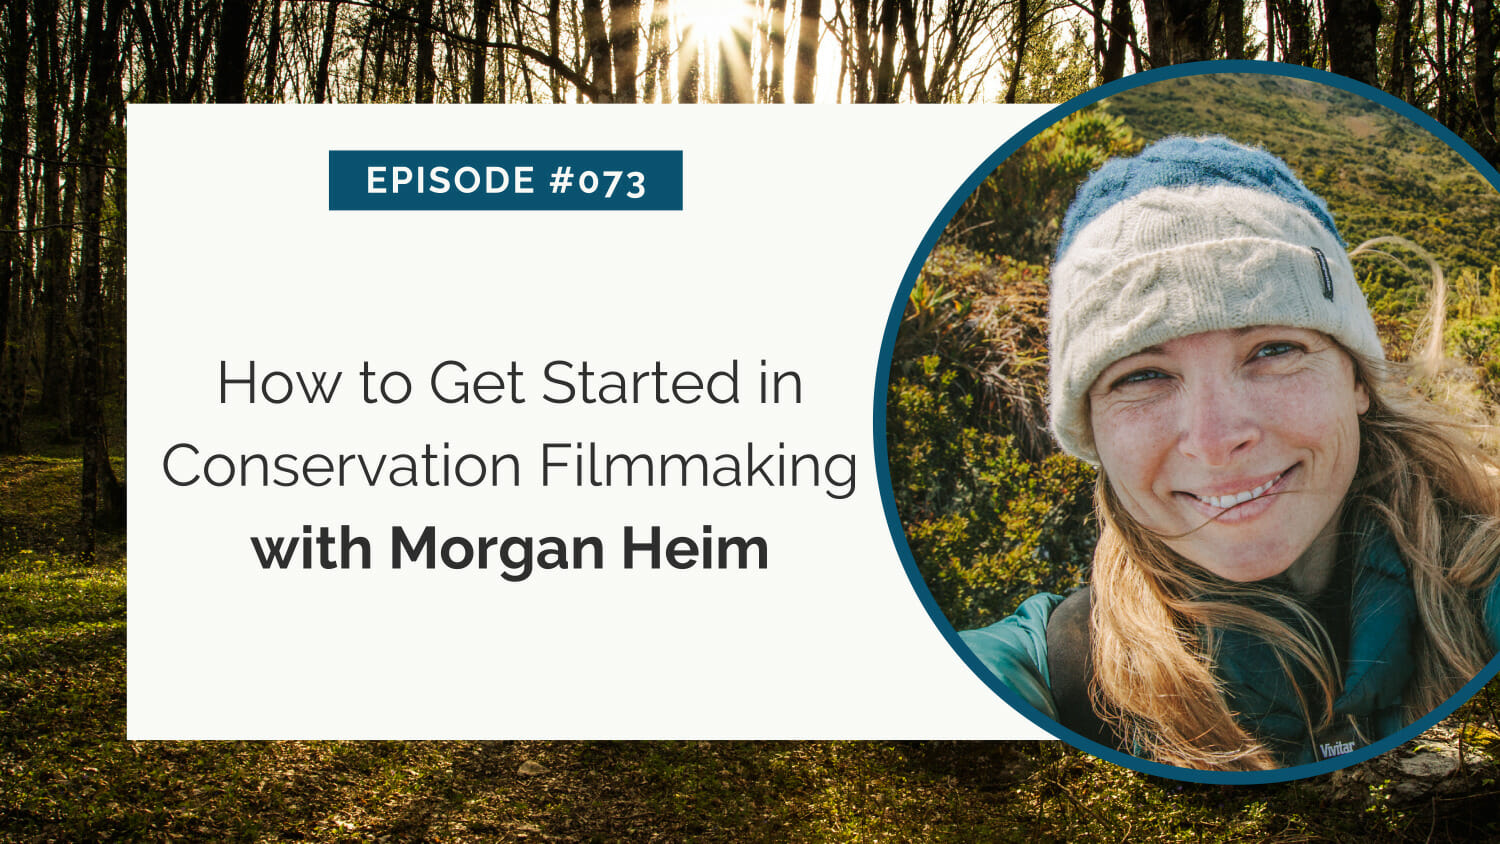 Promotional graphic for podcast episode #073 featuring morgan heim on the topic of "how to get started in conservation filmmaking.